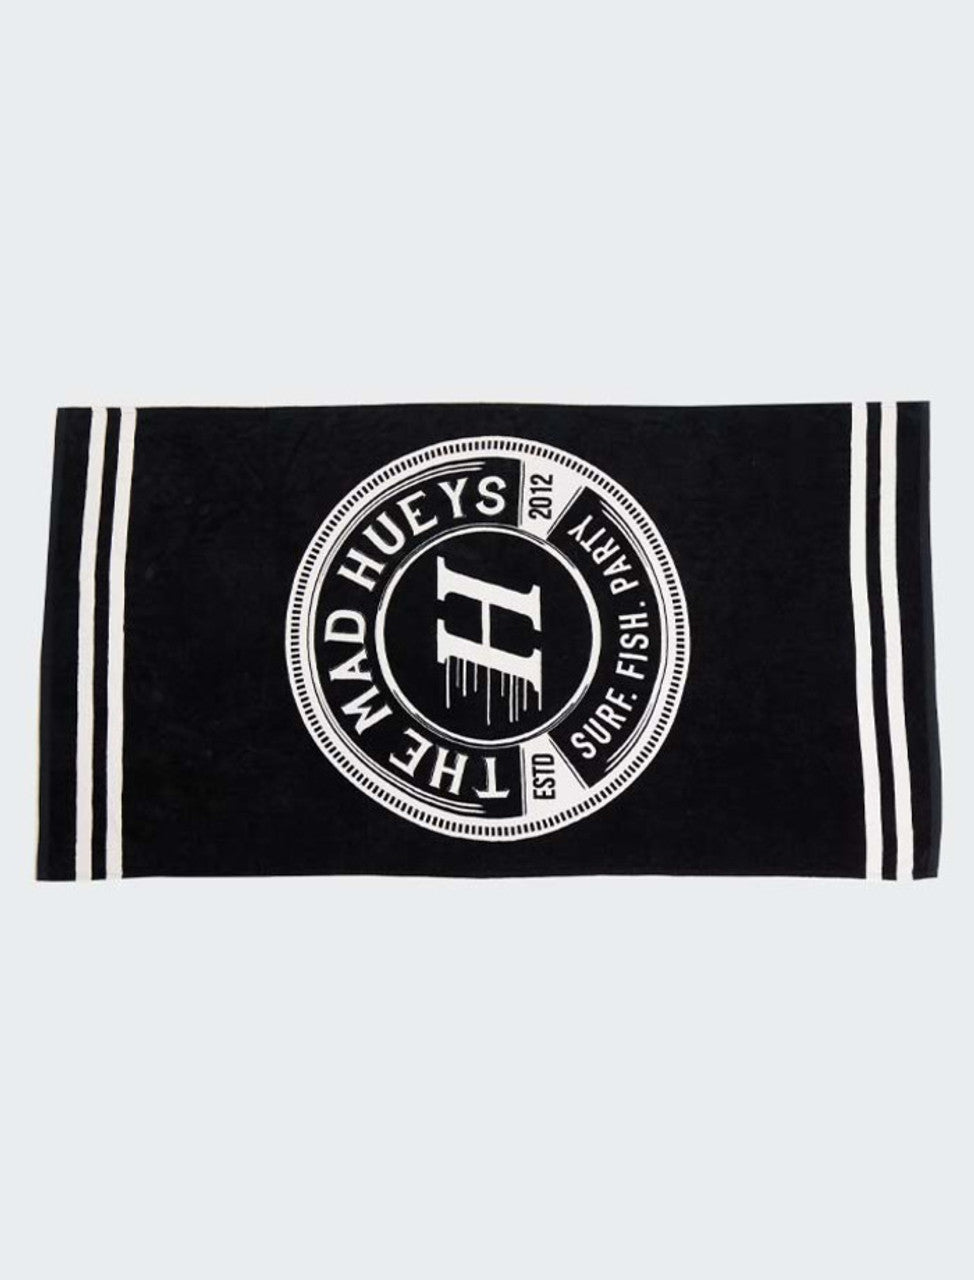 THE MAD HUEYS SURF FISH PARTY TOWEL